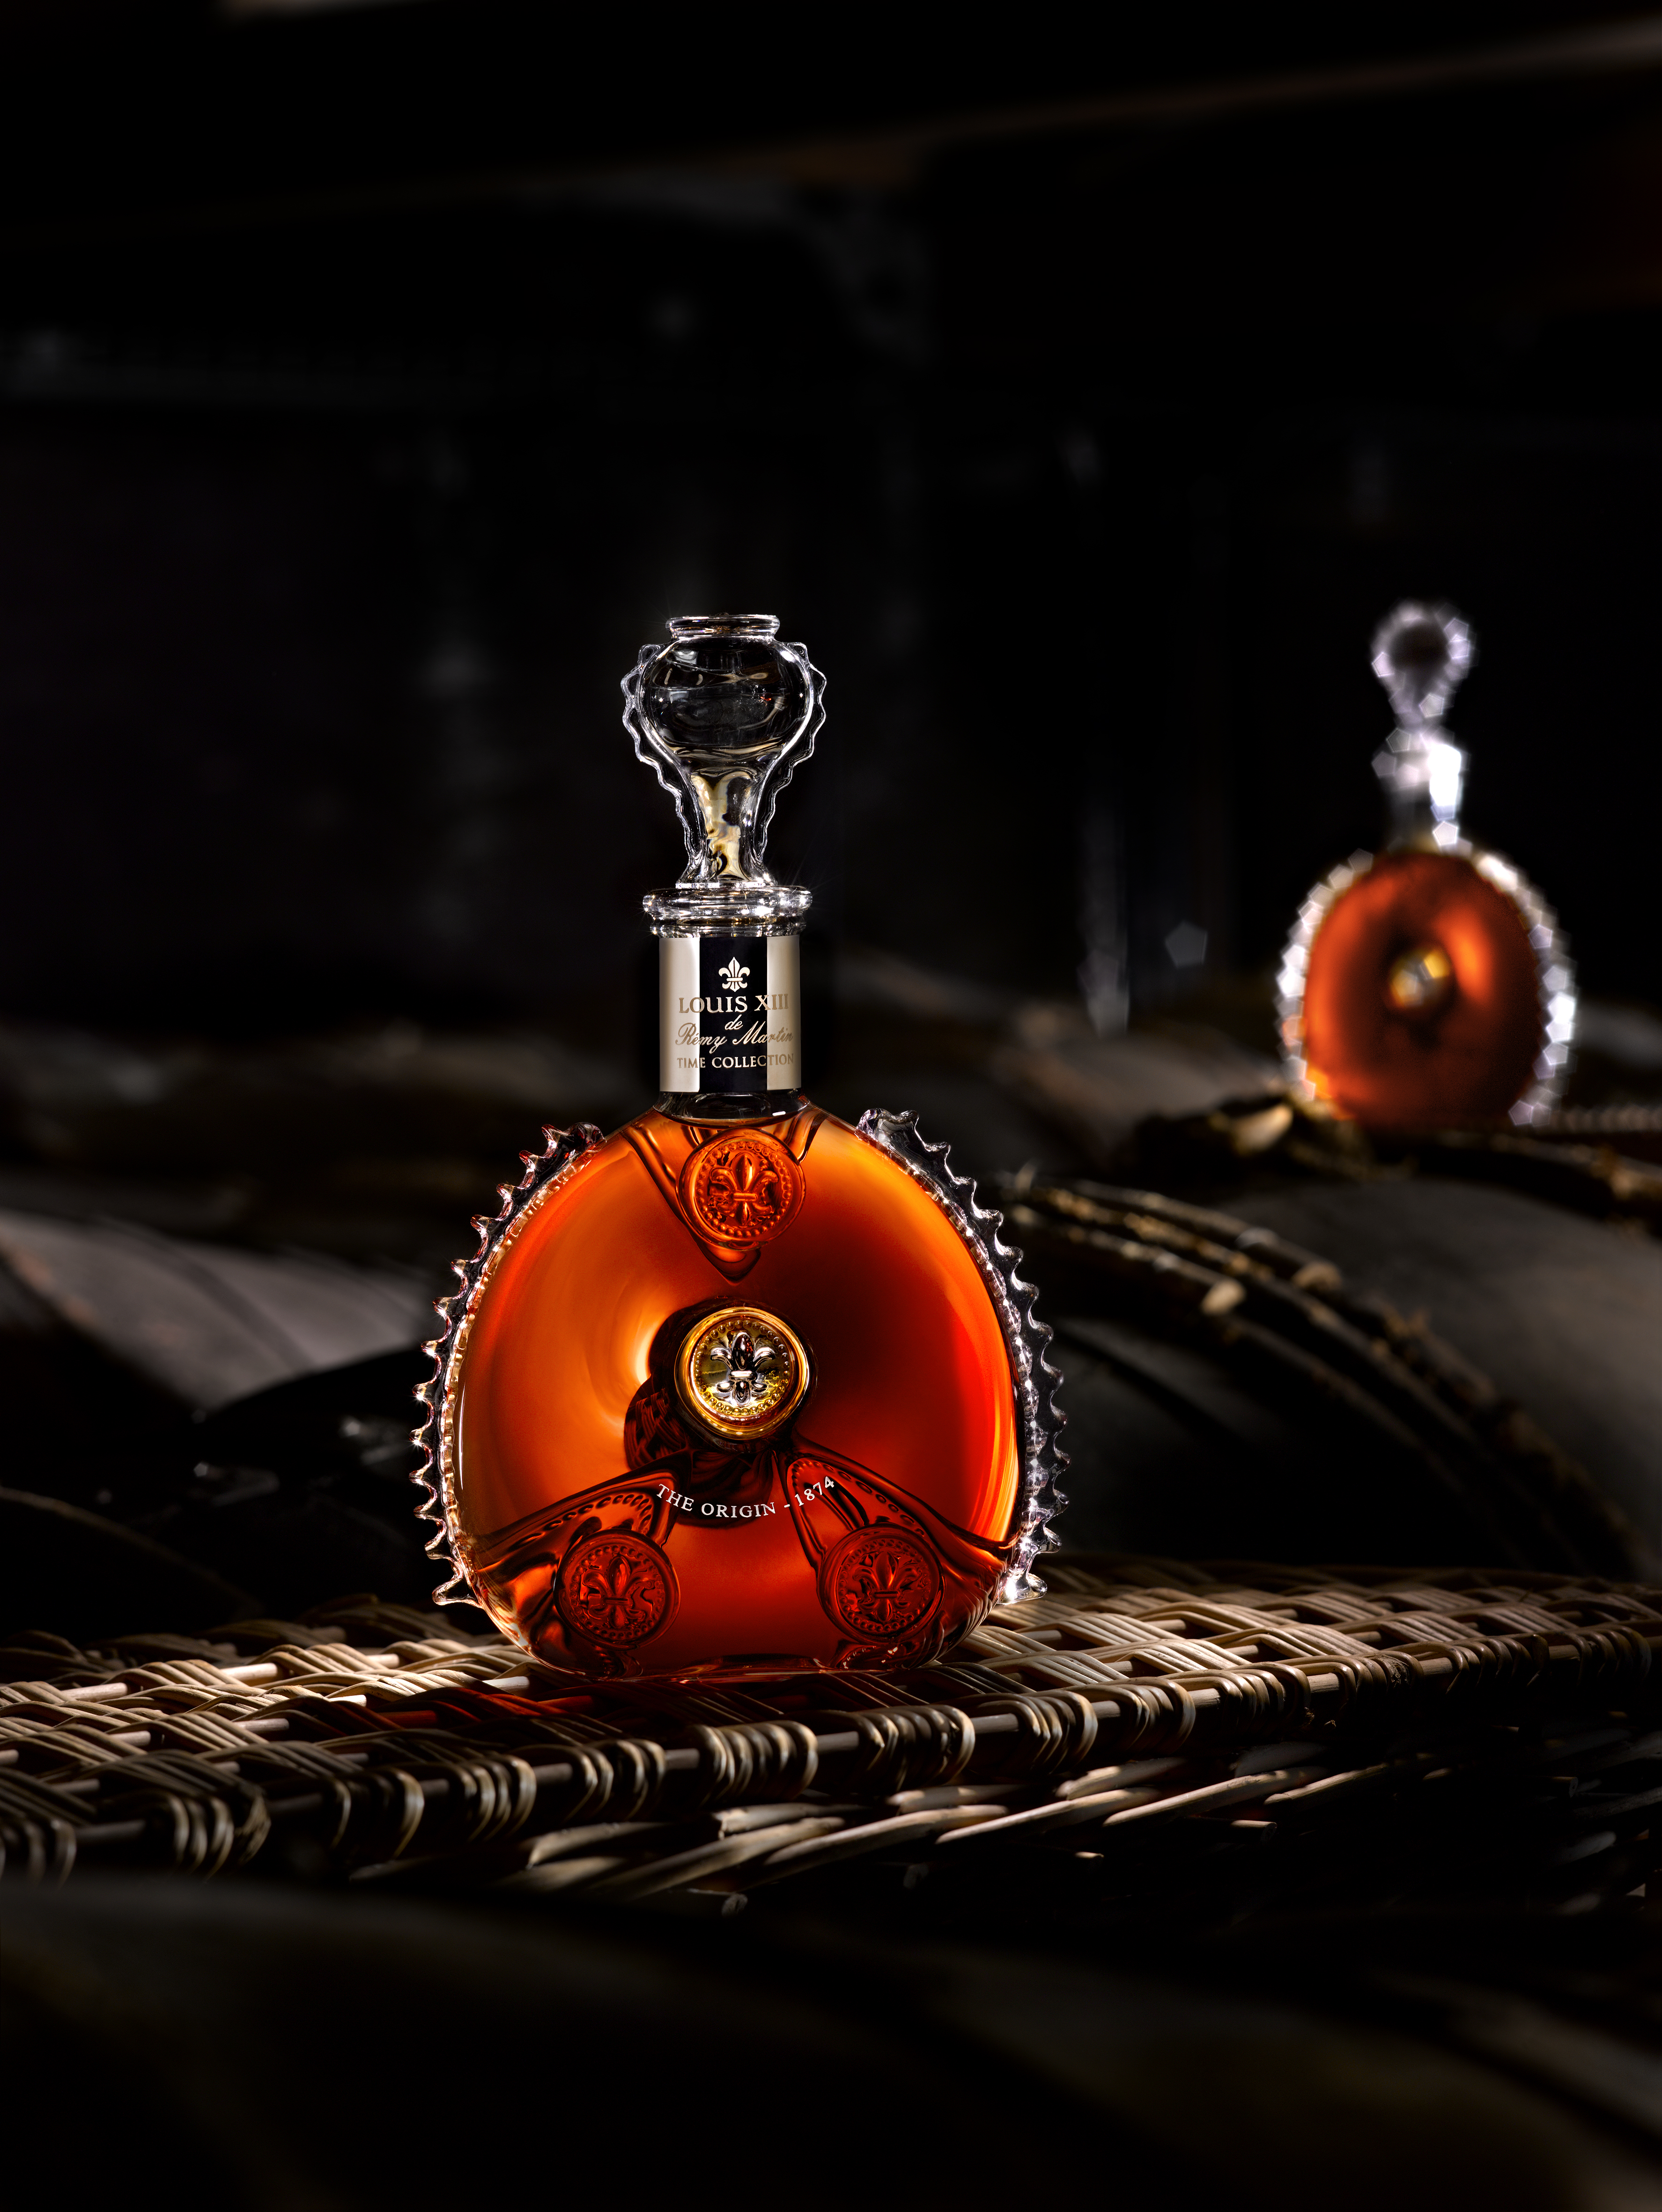 Remy Martin Louis XIII Time Collection Cognac